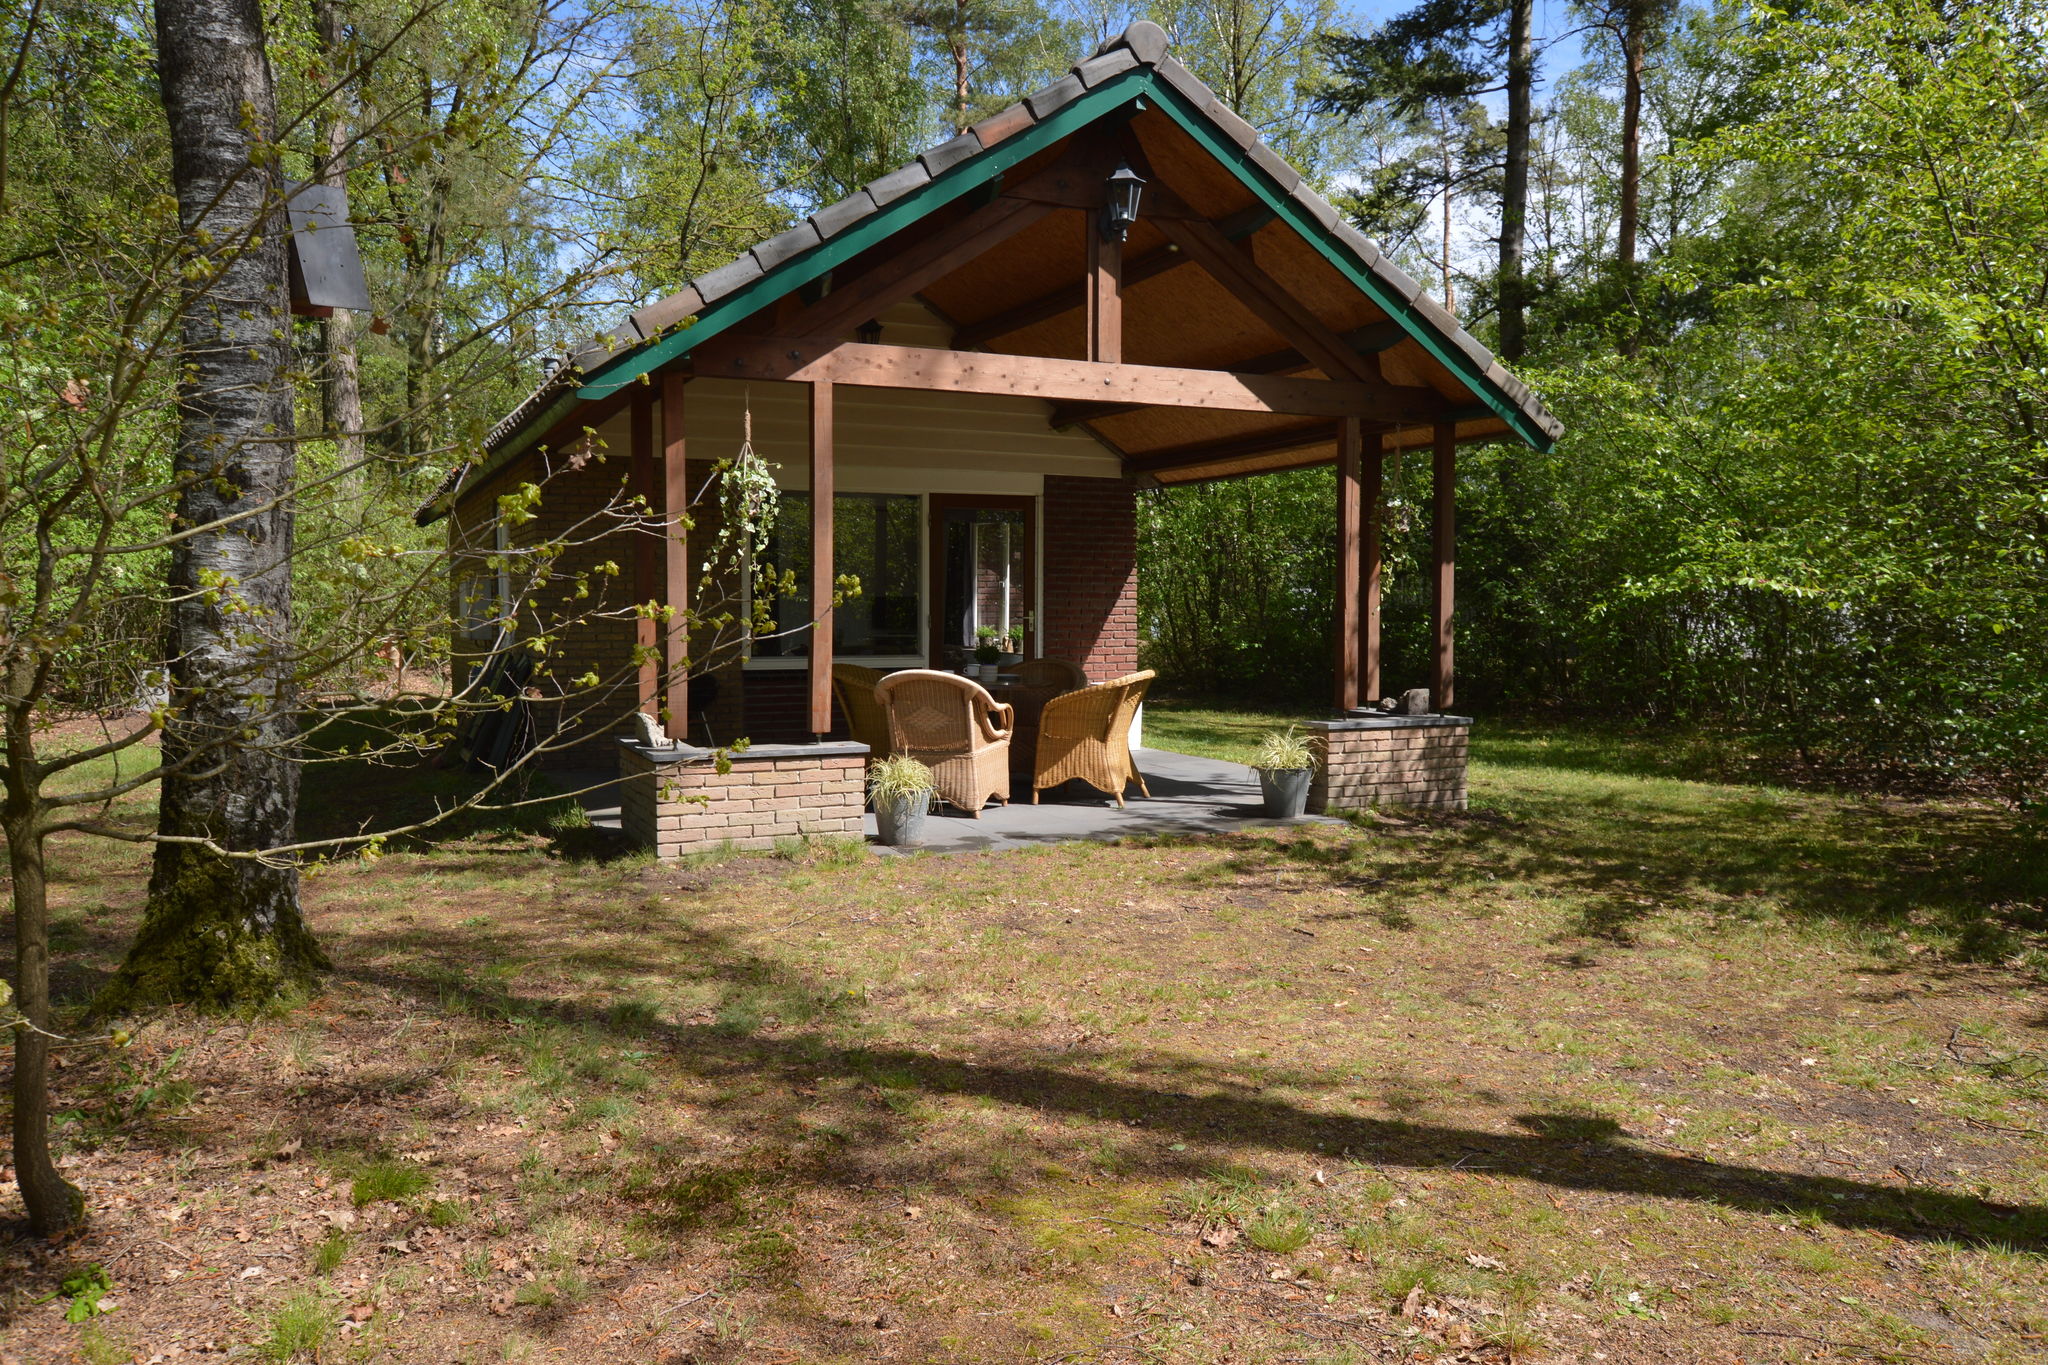 Detached holiday home with sauna, large garden